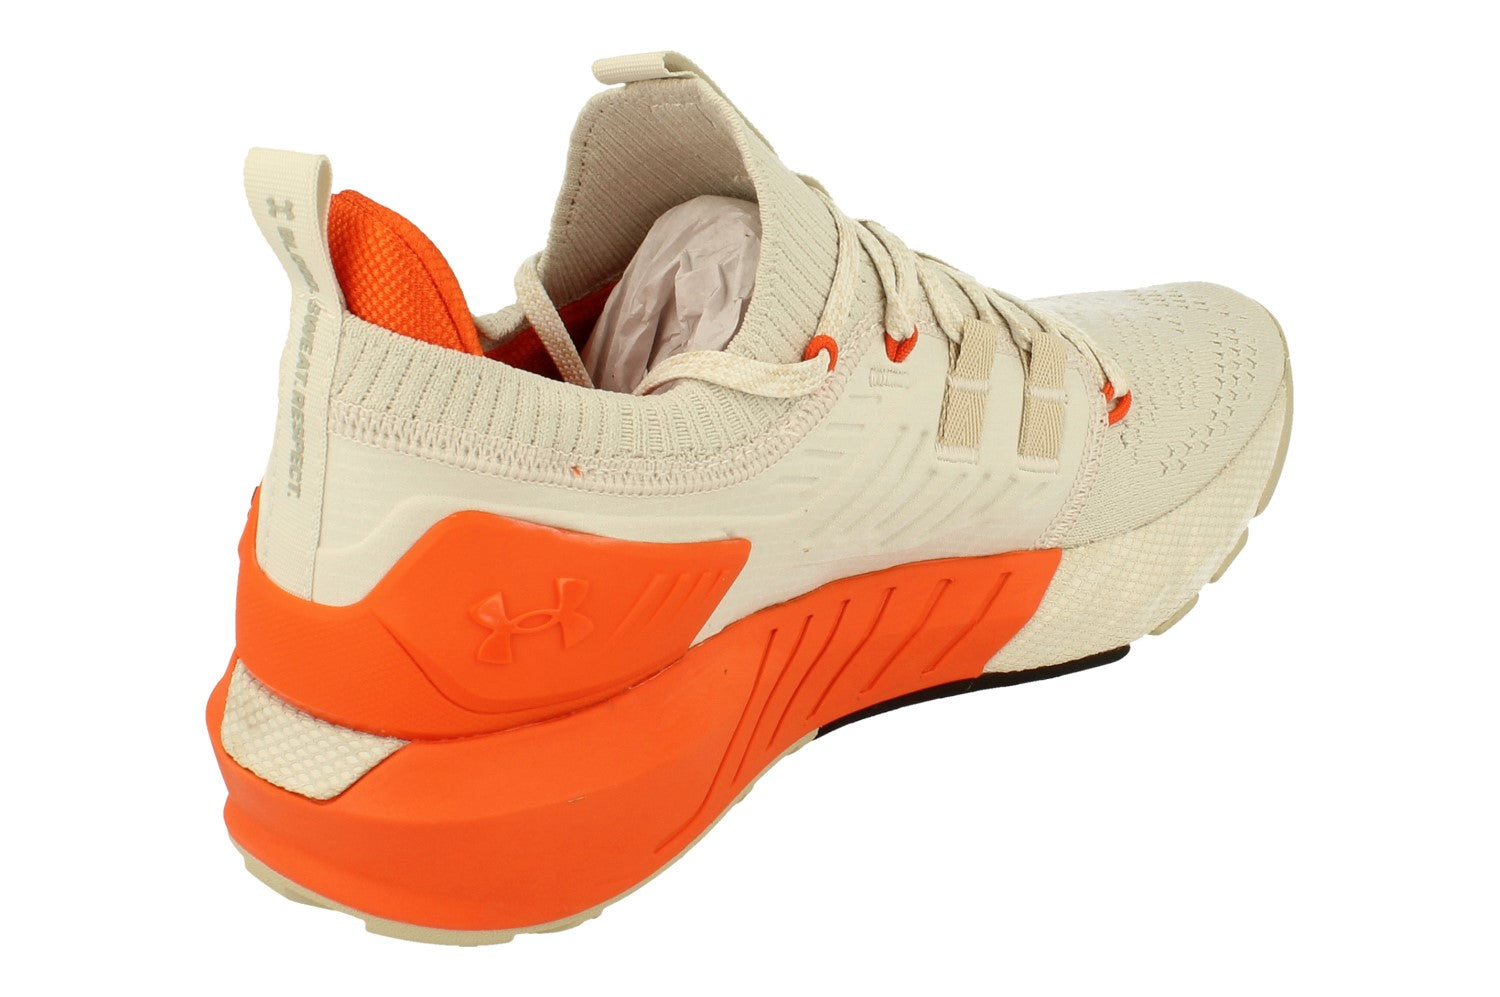 Buy Under Armour Project Rock 3 Mens Trainers 3023004 (uk 9 us 10 eu 44,  white orange 111) 111 - Free UK Delivery - Super Fast EURO & USA Delivery!  – KicksWorldwide